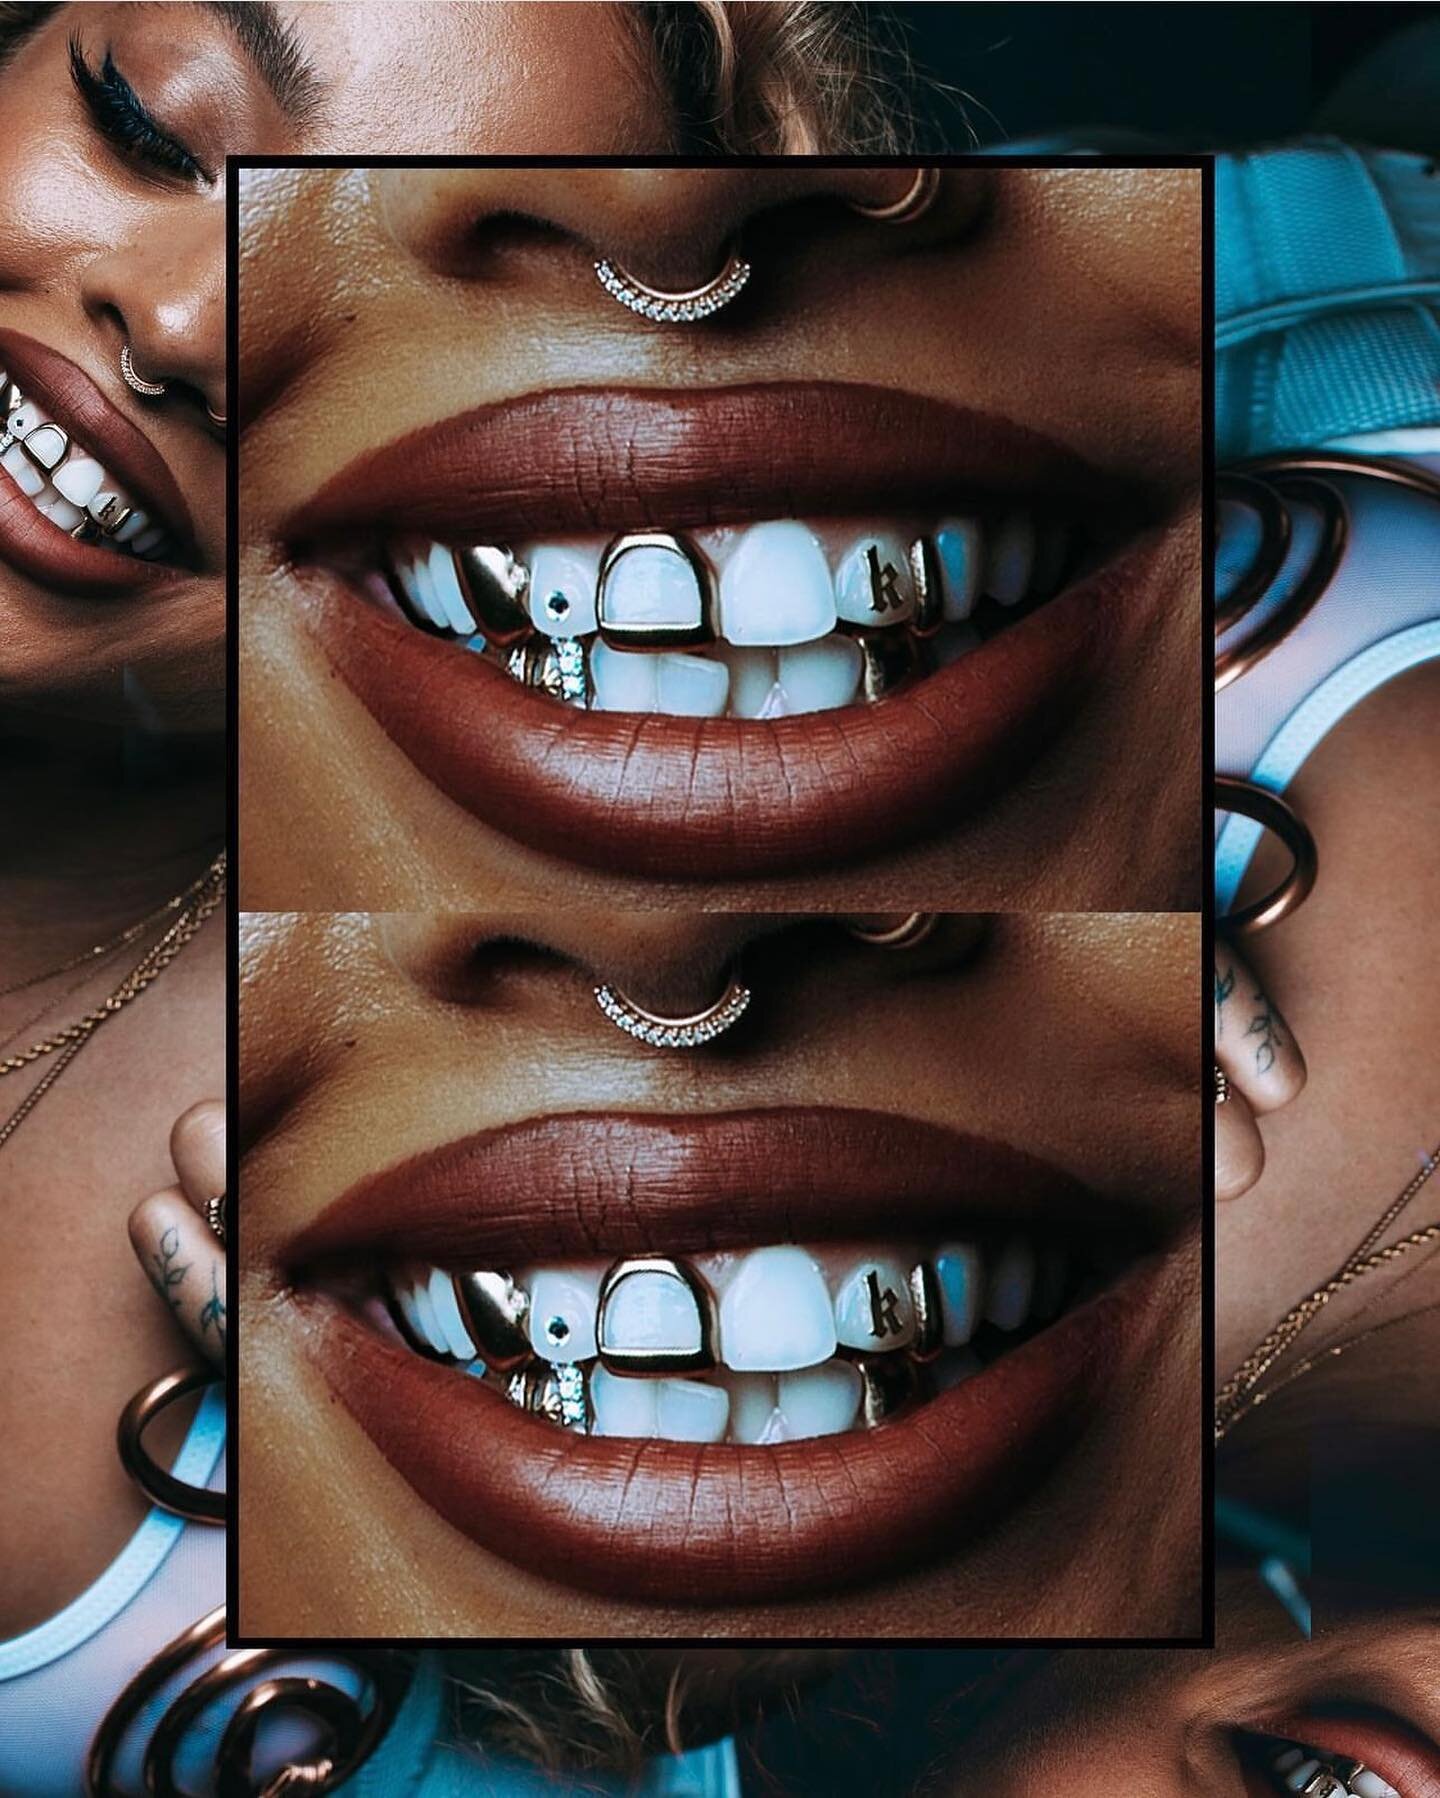 Would you try this design? Book your tooth gem appointment! Quick, painless and lasts anywhere from 3 months-2+ years! 

📸: @please.no.photoss